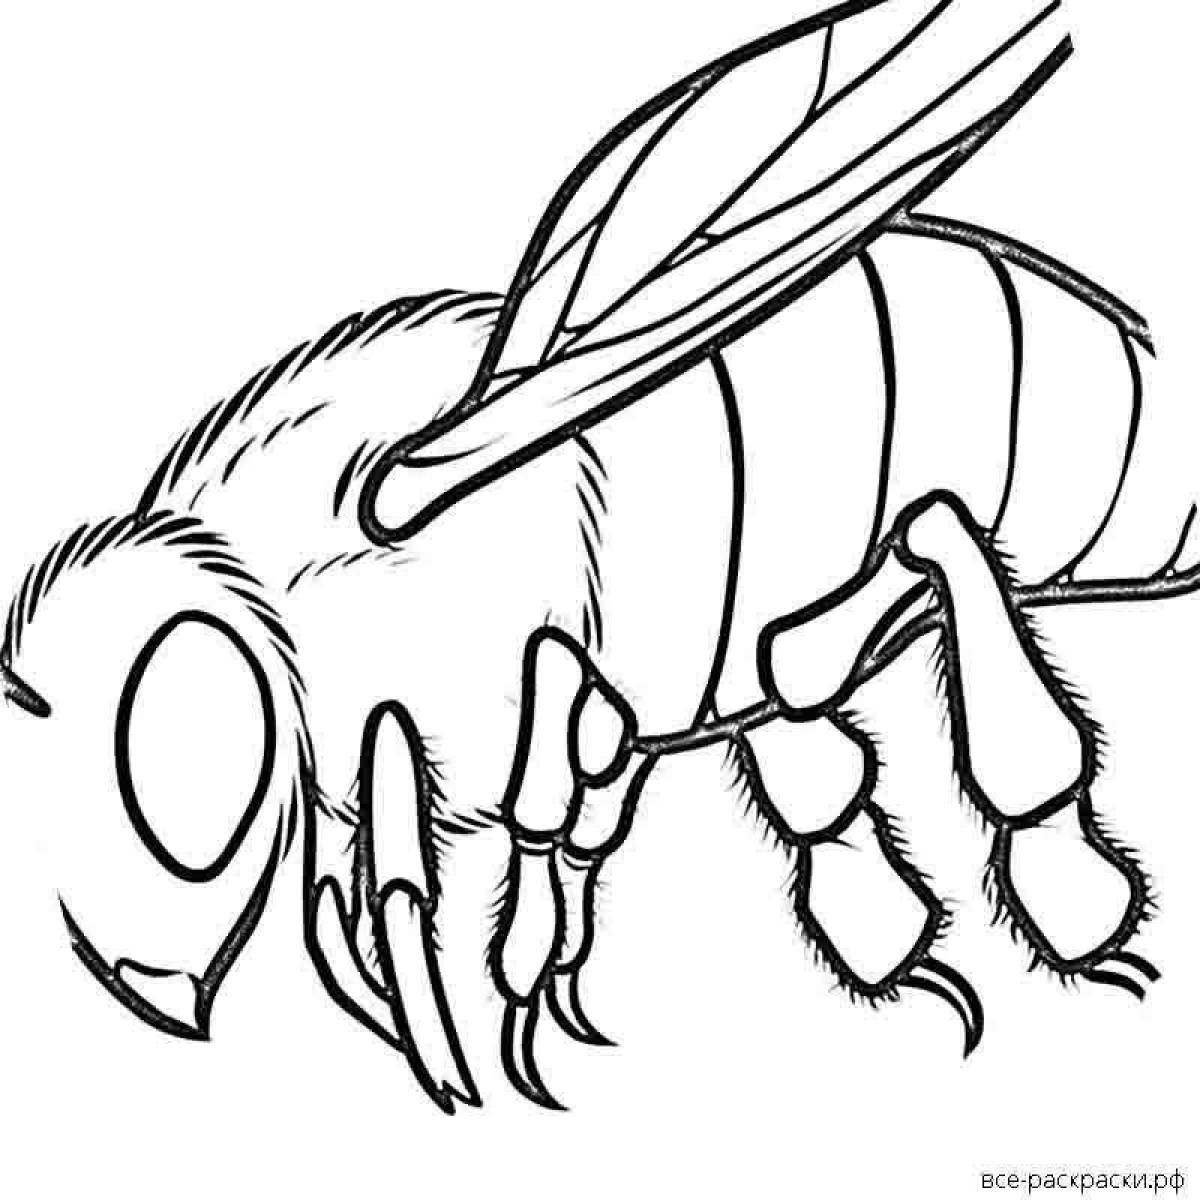 Coloring page nice lady bee